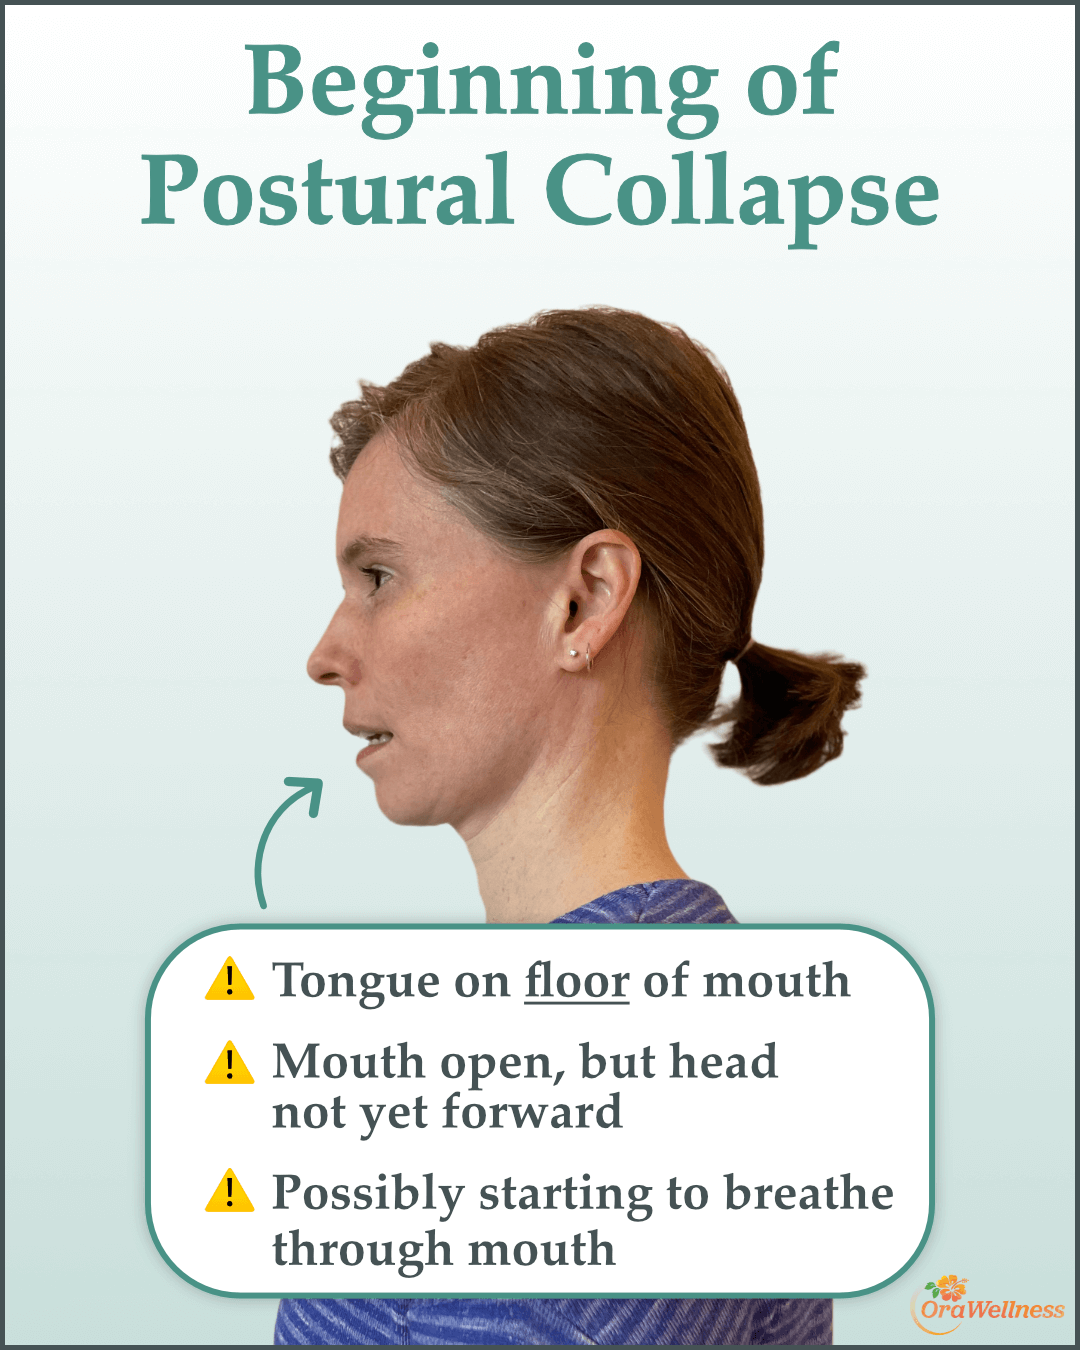 Beginning of Postural Collapse / Tongue on floor of mouth / Mouth open, but head not yet forward / Possibly starting to breathe through mouth